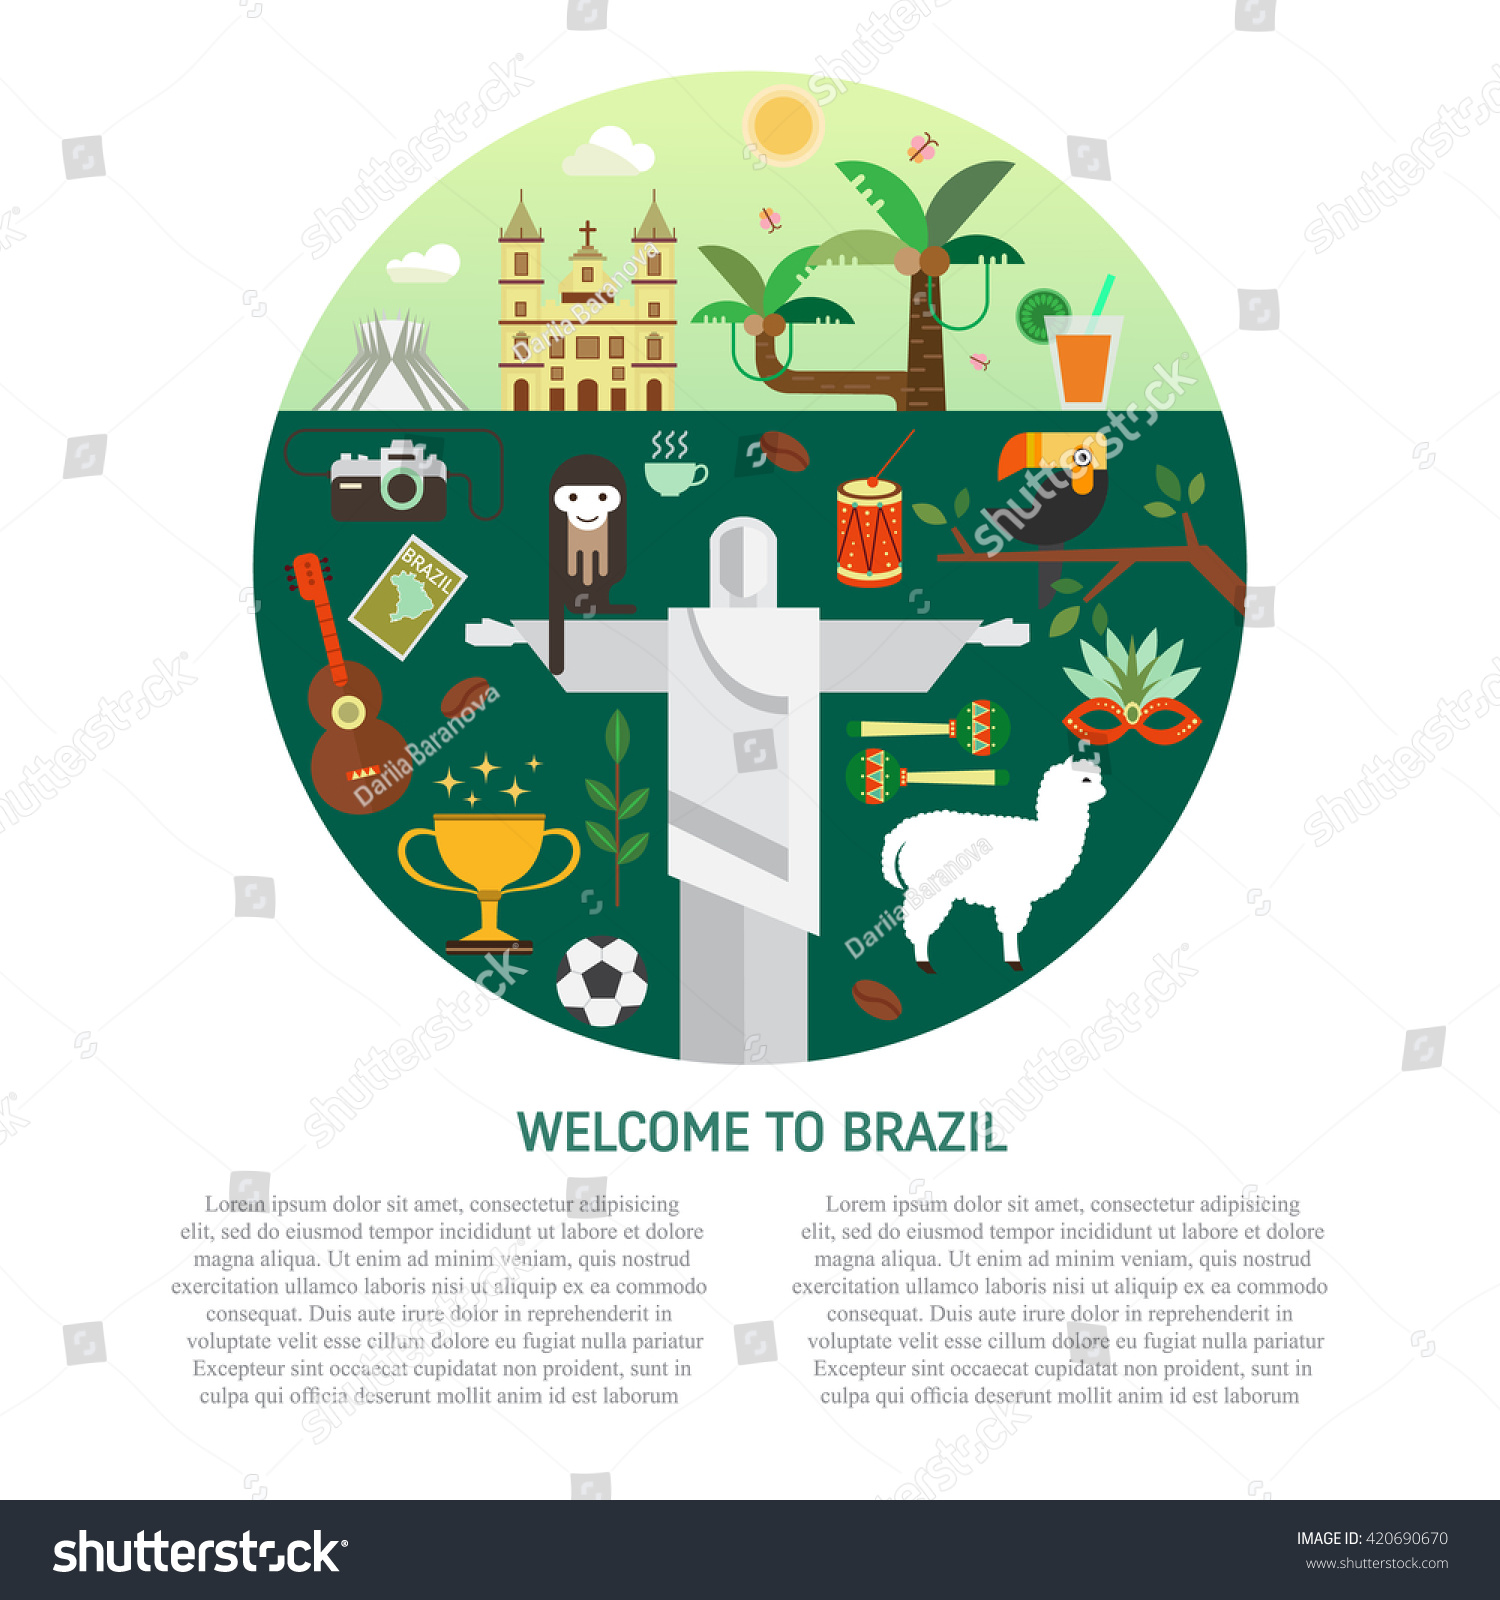 SVG of Vector illustration with Brazil symbols  made in modern flat style. Travel to Brazil concept. Flat icons arranged on circle and place for your text. svg